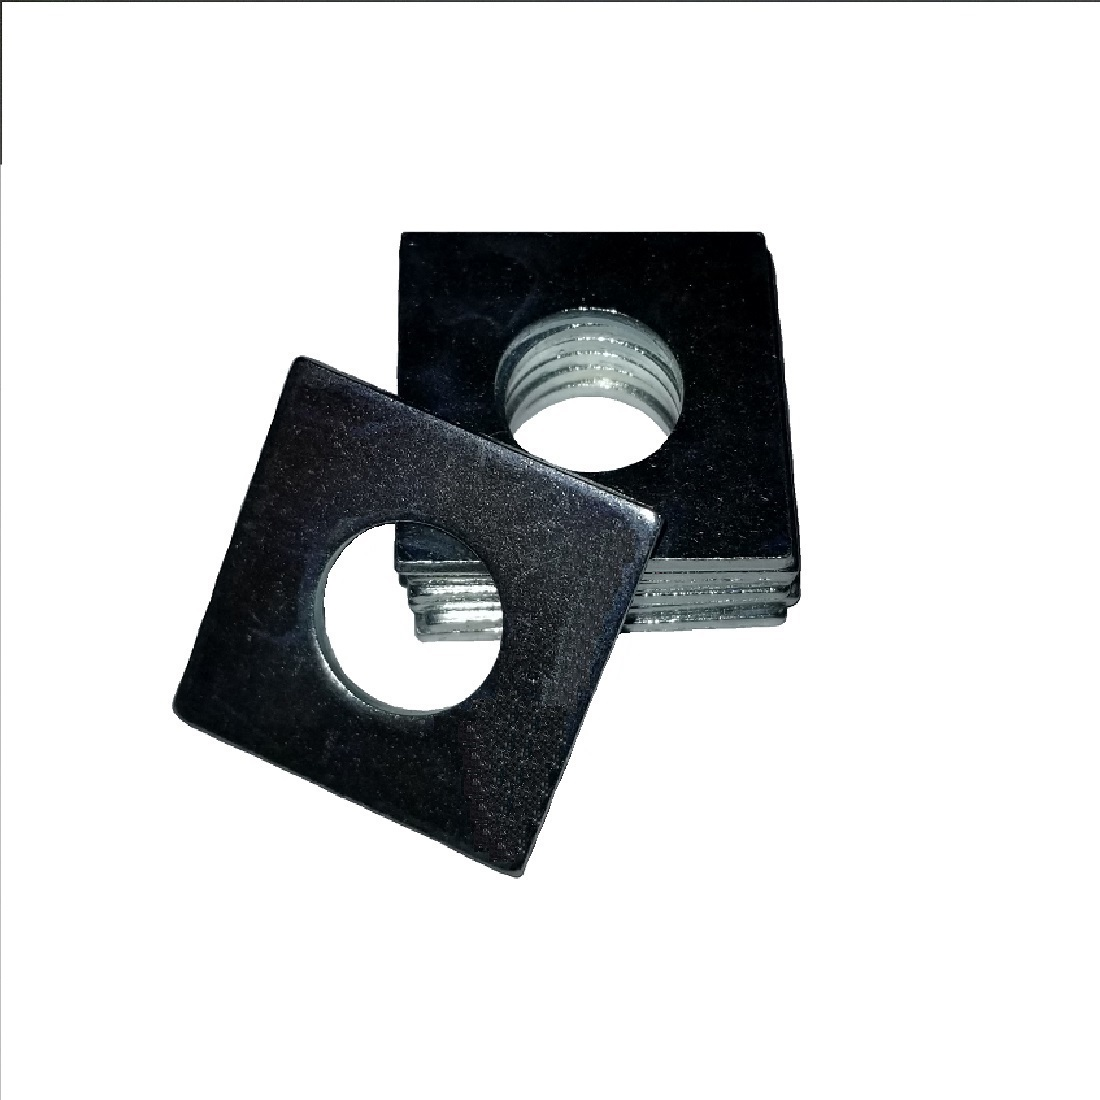 Square OD Washer - 0.562 ID, 2.000 OD, 0.250 Thick, Low Carbon Steel - Soft, Zinc & Clear